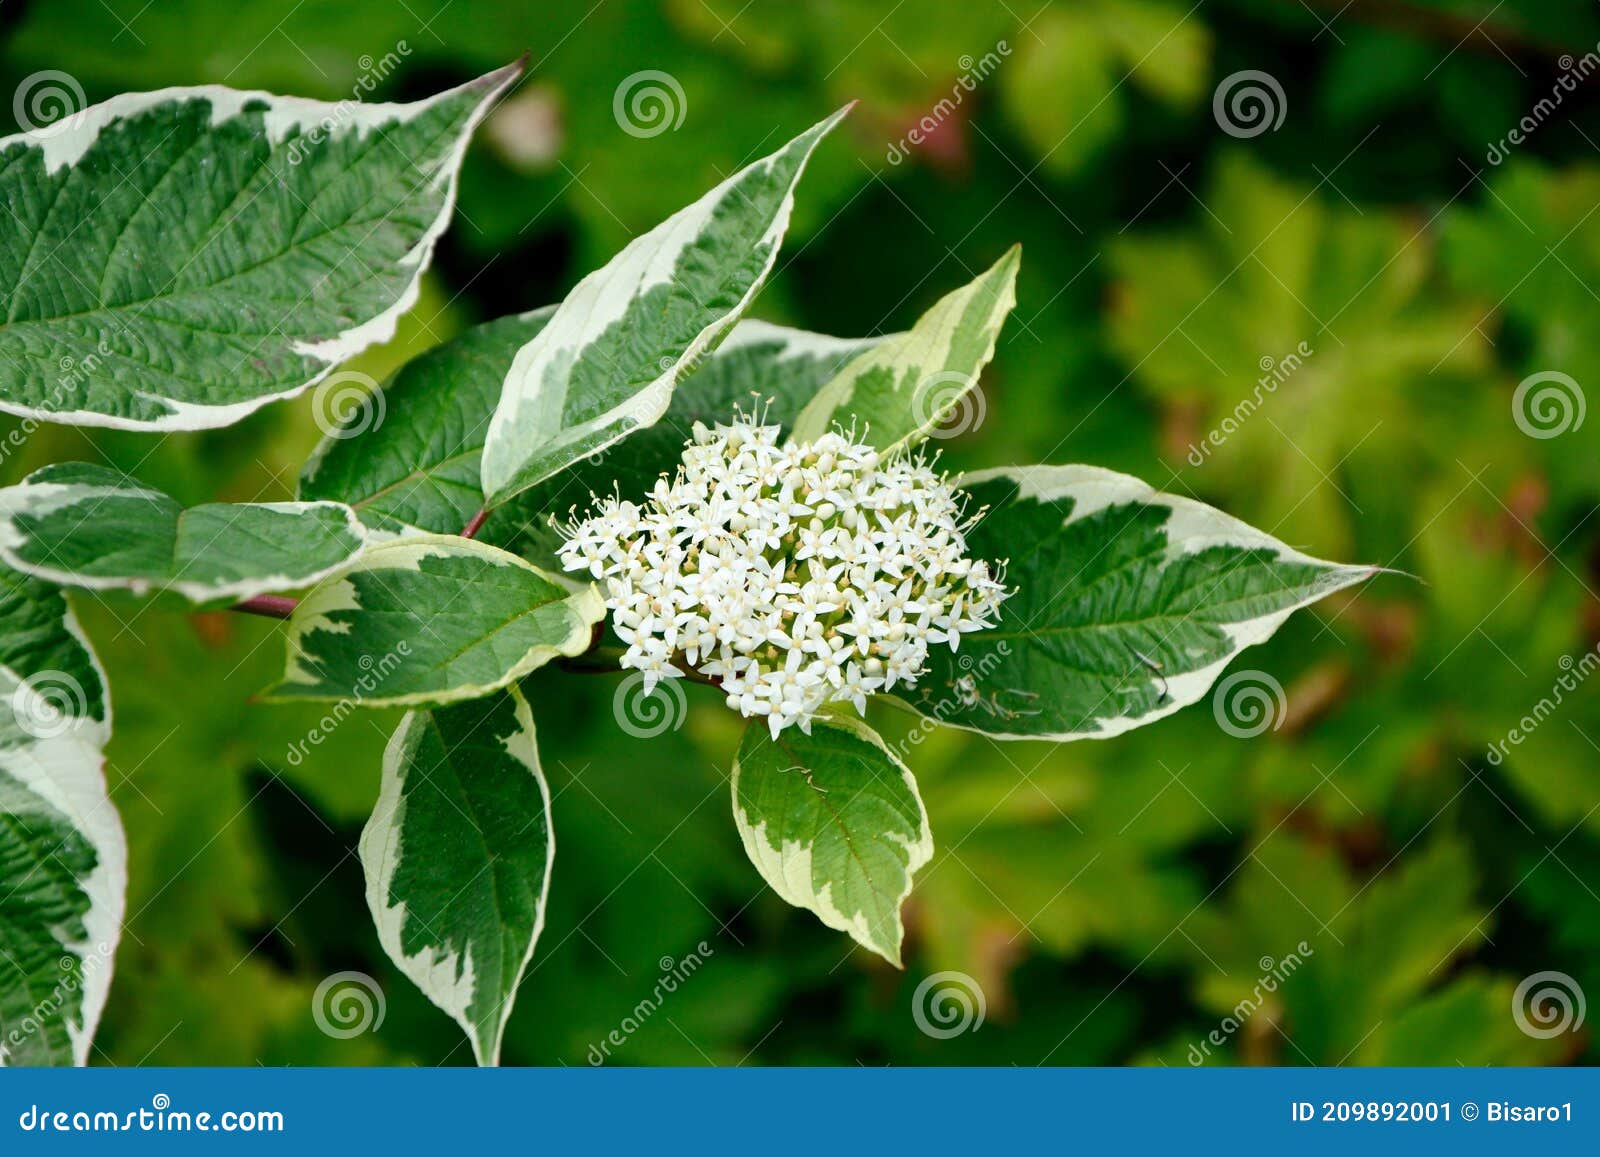 cornus alba with white and green leaves blossom in spring in the garden